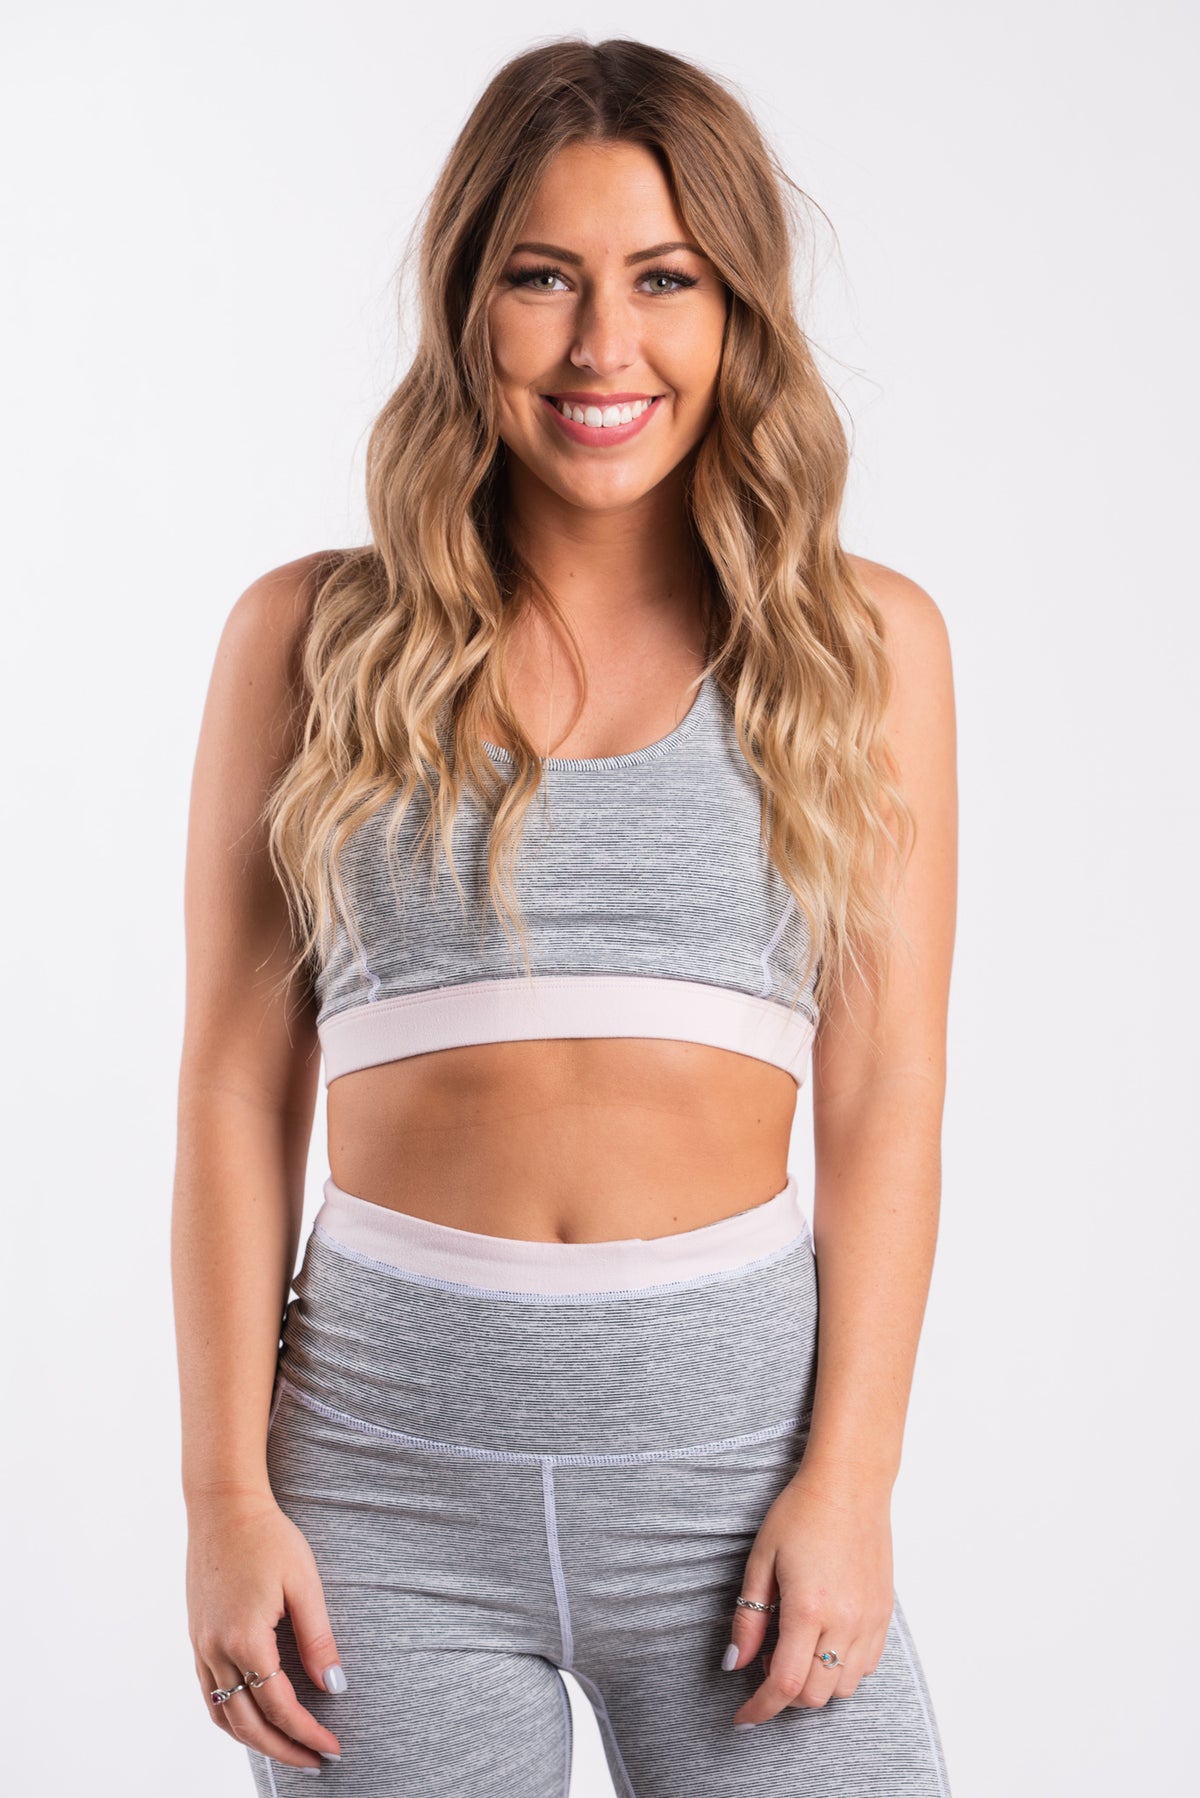 AT2294 micro striped color contrast racerback sports bra - Cute bra - Trendy Bras and Bralettes at Lush Fashion Lounge Boutique in Oklahoma City